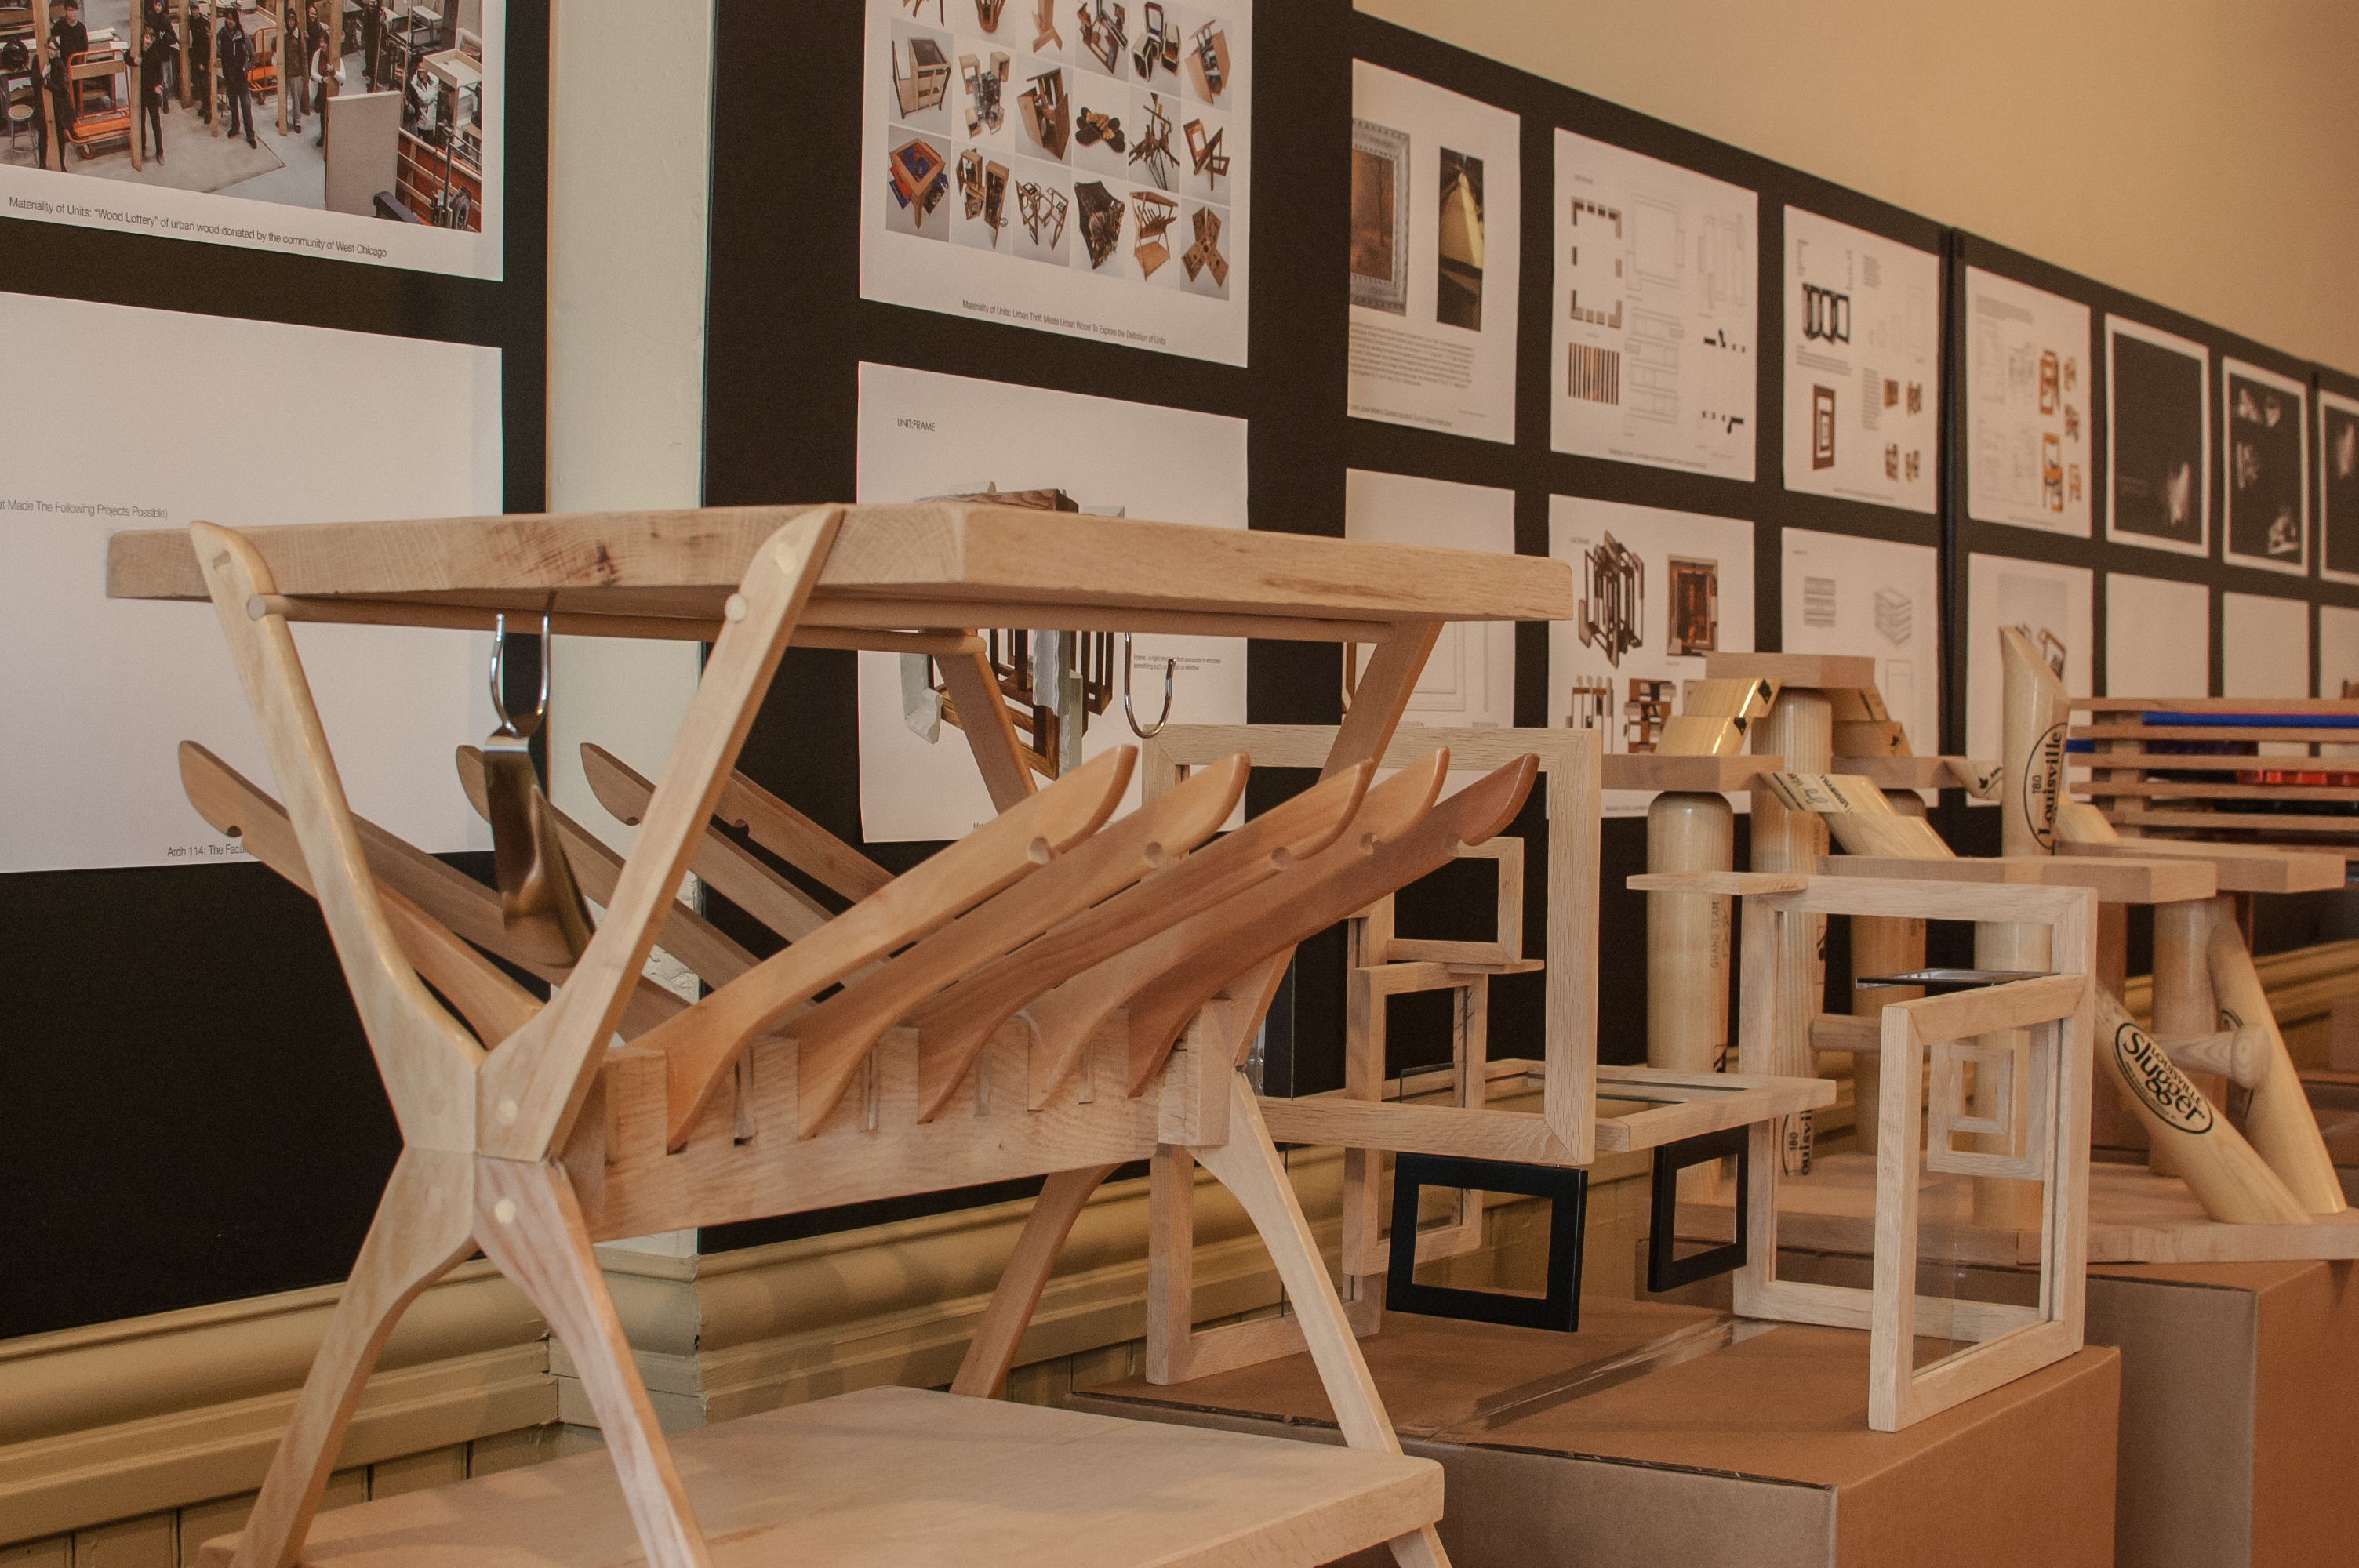 IIT Architecture Student Work On Display at West Chicago City Museum